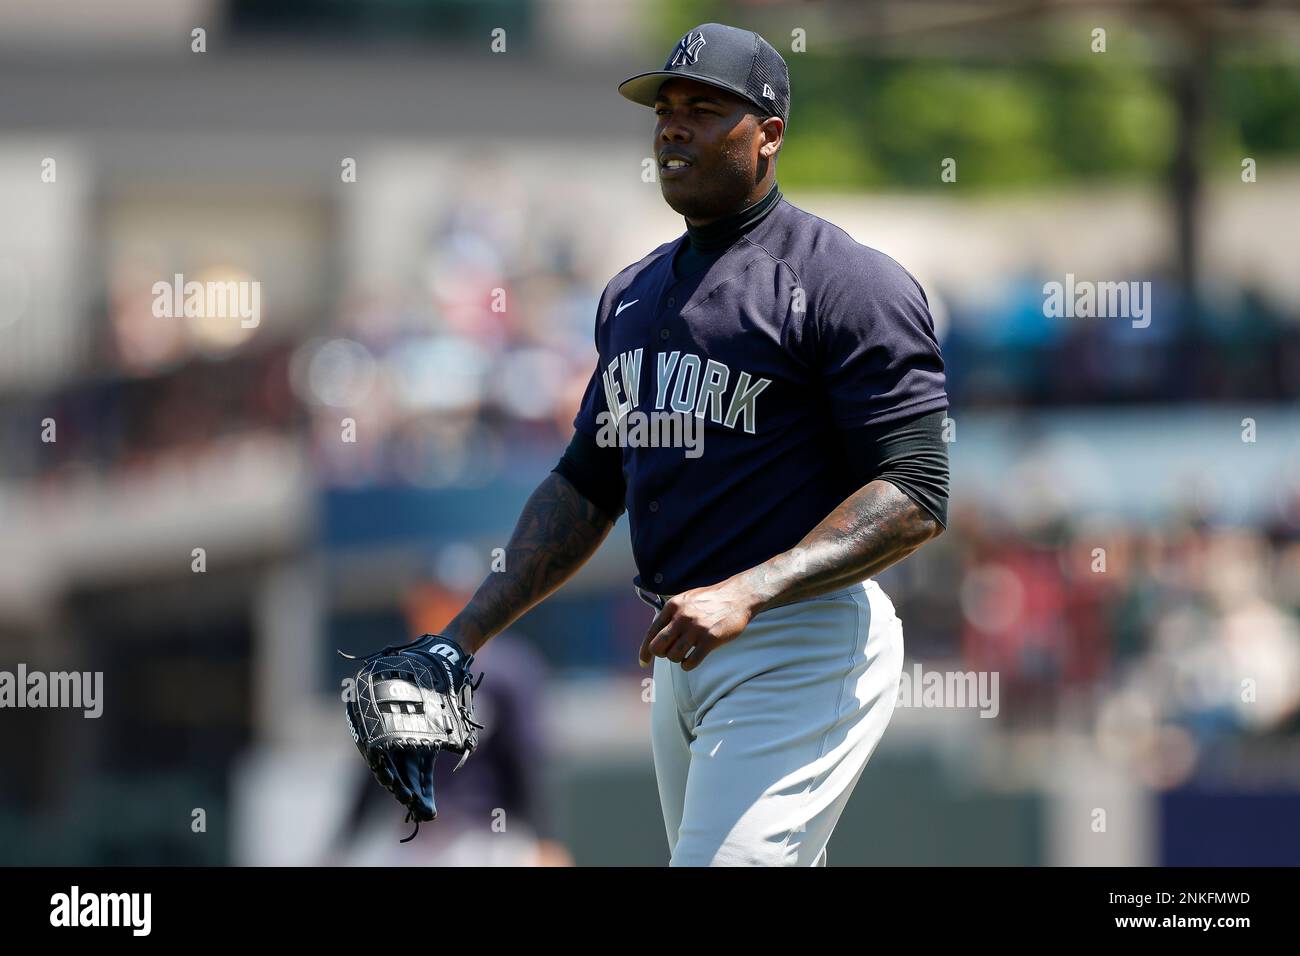 LAKELAND, FL - MARCH 28: New York Yankees shortstop Isiah Kiner-Falefa (12)  throws the ball during a Spring Training Baseball game between the Detroit  Tigers and New York Yankees on March 28